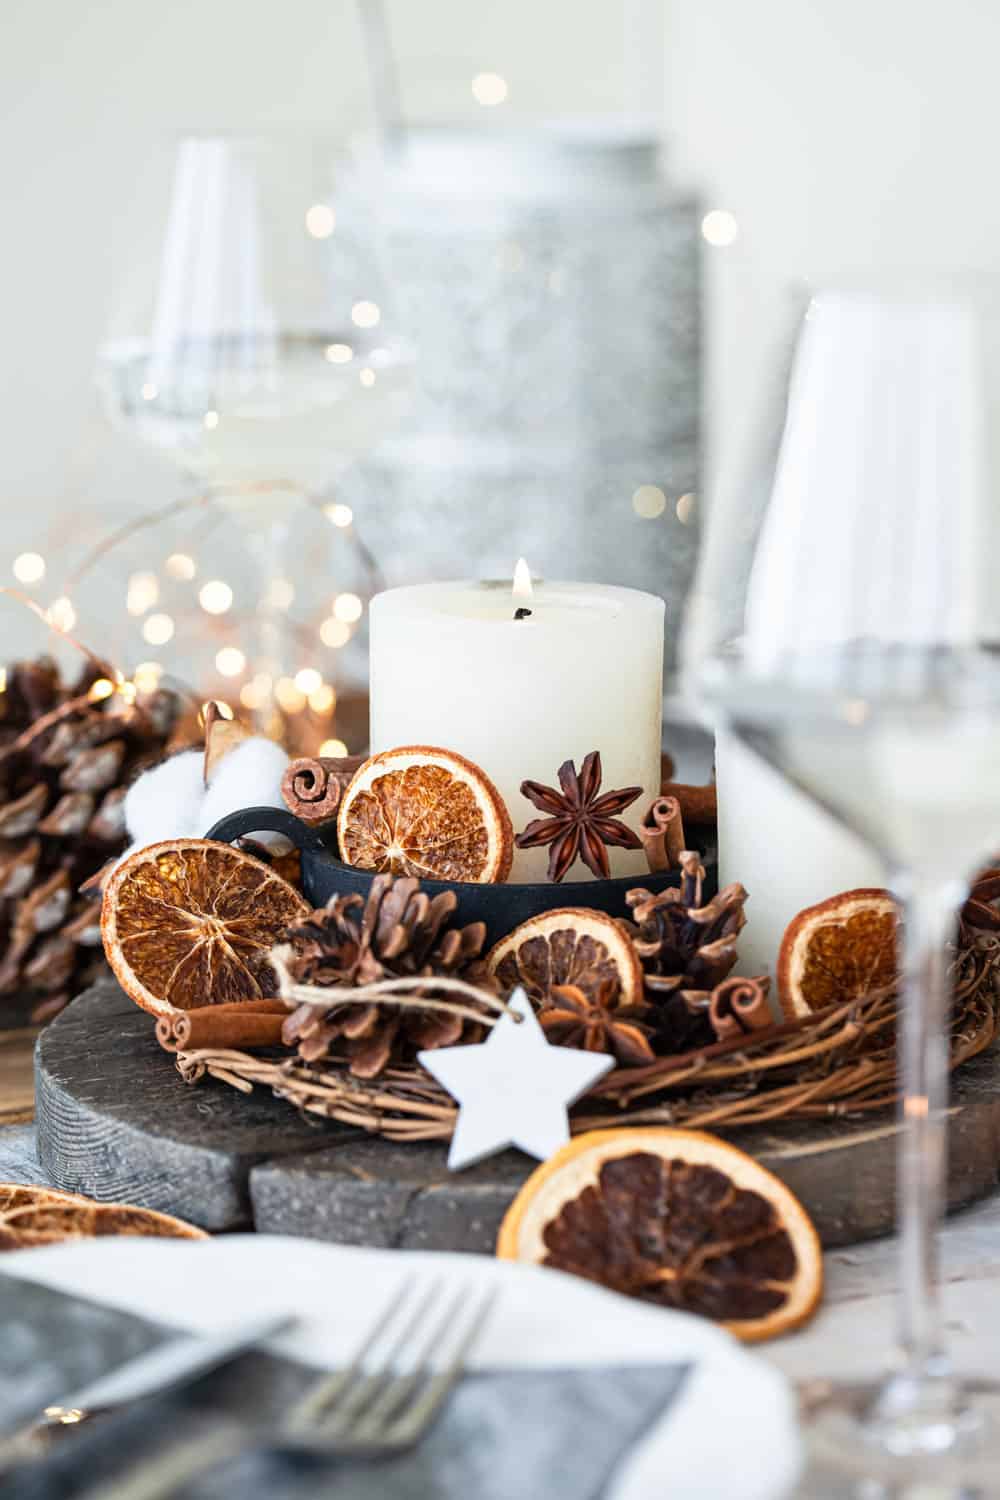 Wonderful spiced candle from citrus and pinecones